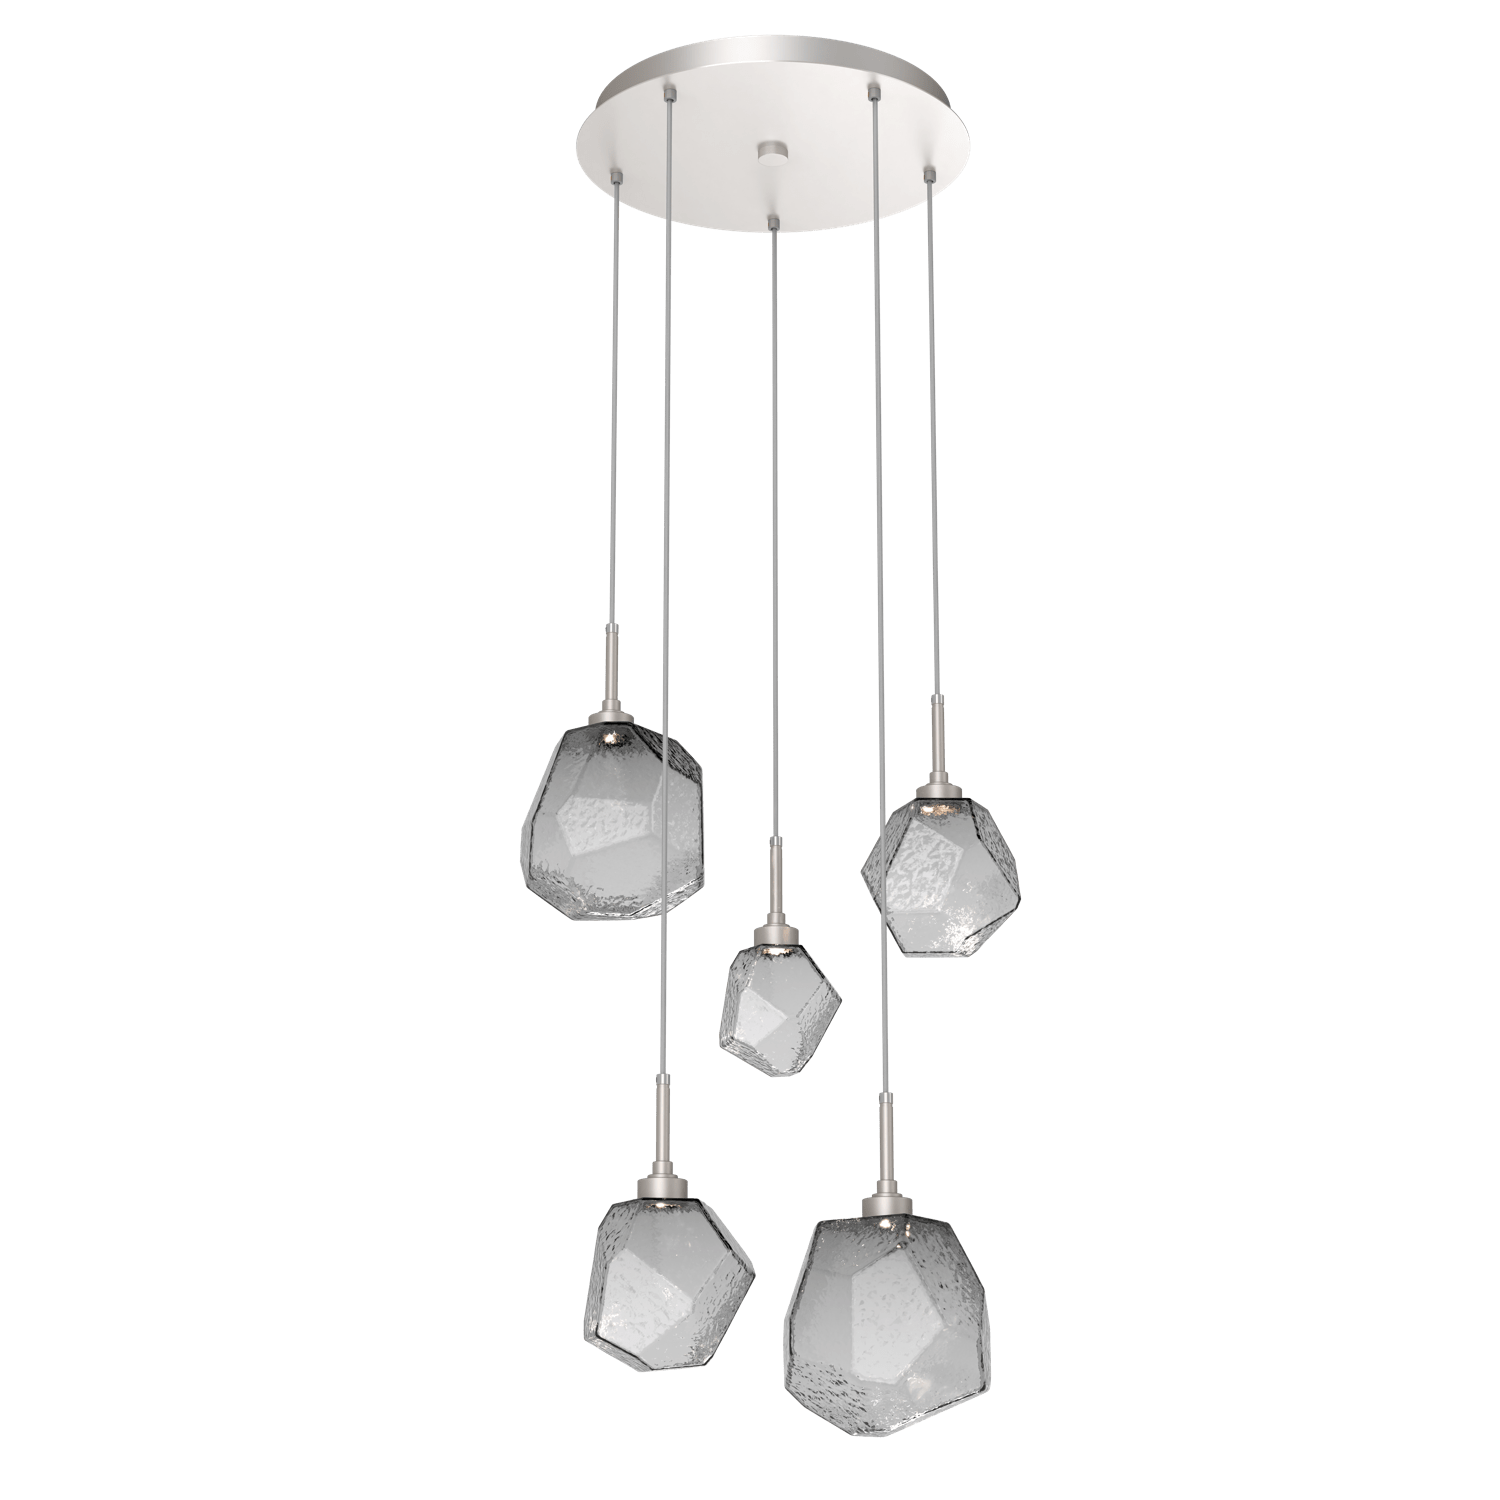 CHB0039-05-BS-S-Hammerton-Studio-Gem-5-light-round-pendant-chandelier-with-metallic-beige-silver-finish-and-smoke-blown-glass-shades-and-LED-lamping